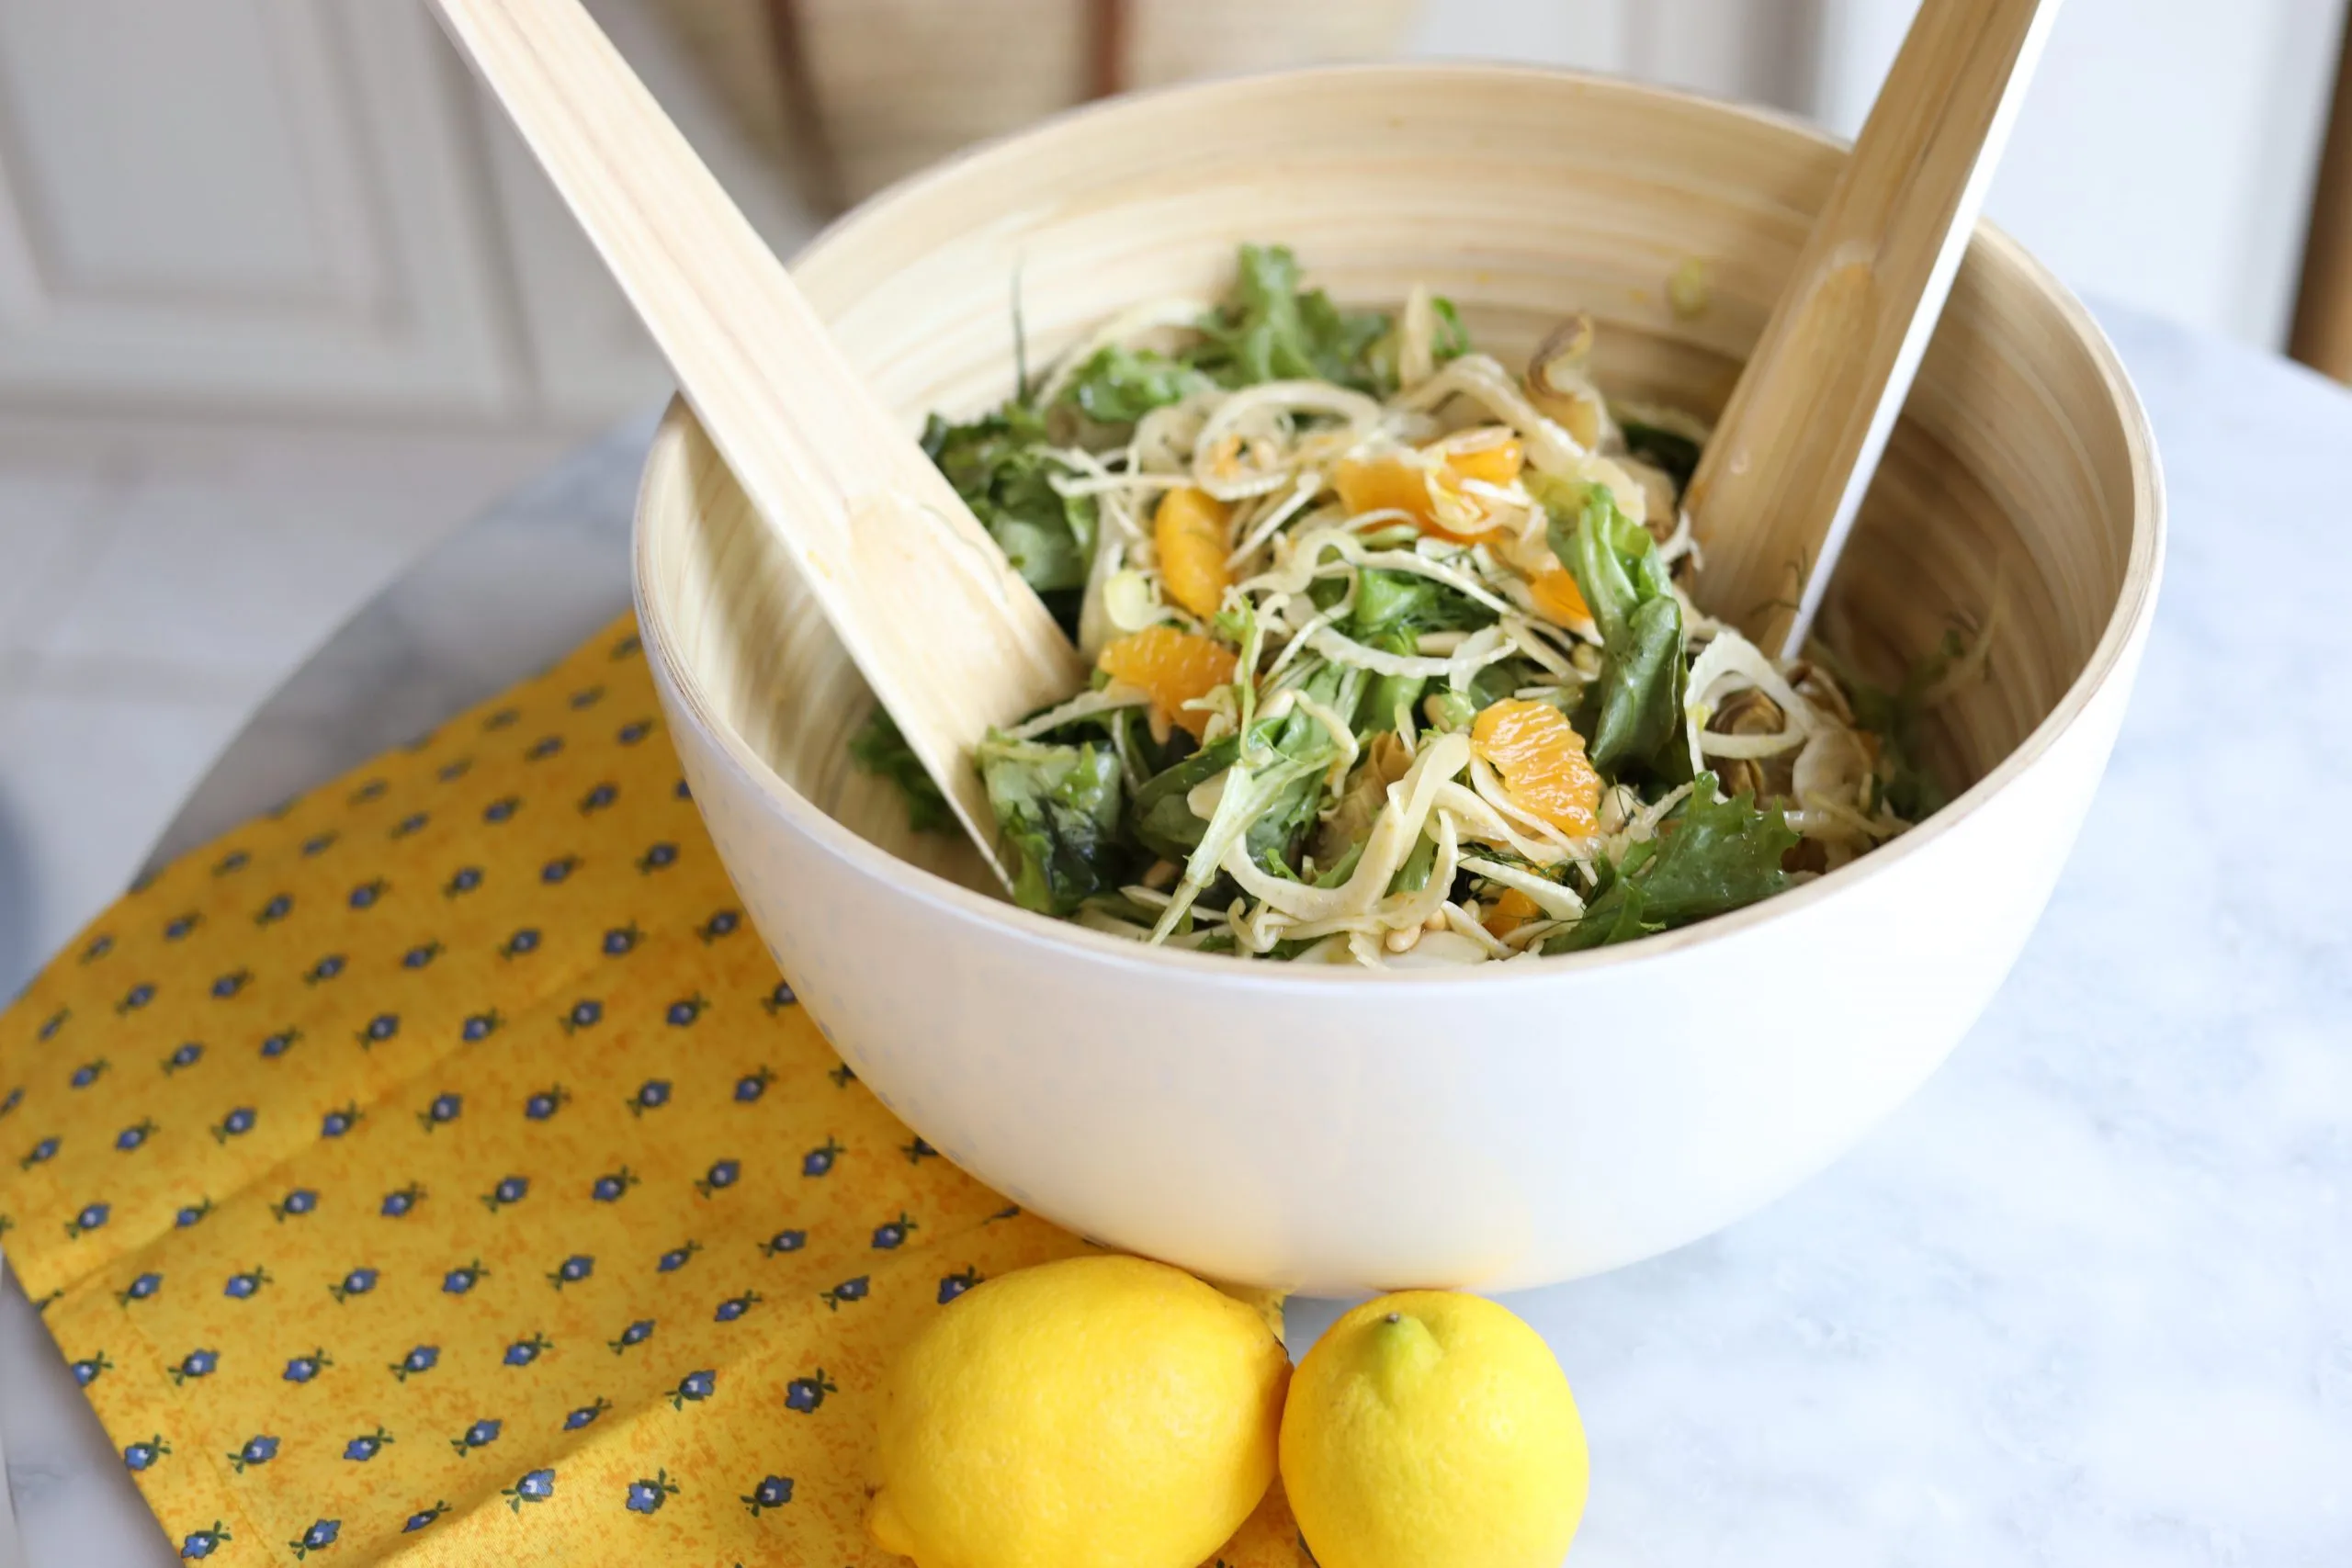 la salade mentonnaise : fennel, oranges, pine nuts, artichokes and greens in a serving bowl